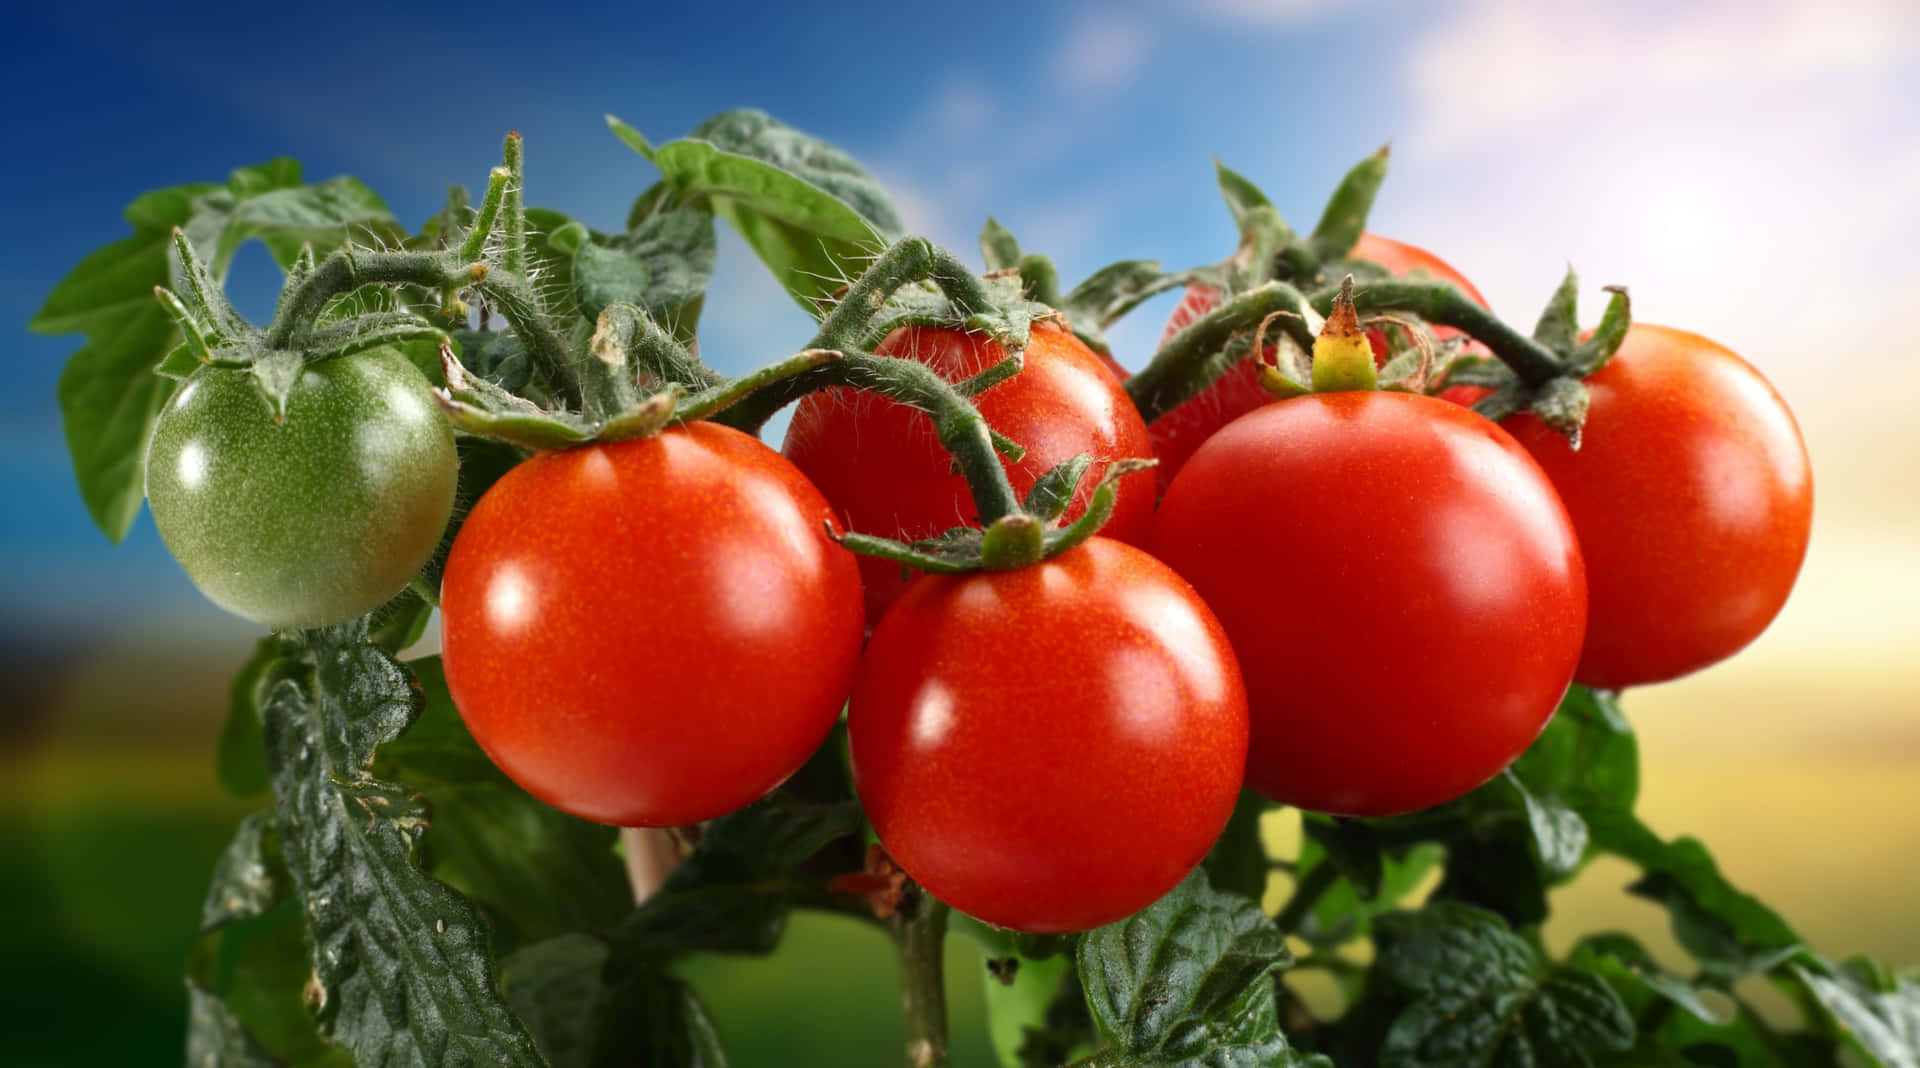 Fresh and juicy tomatoes for the perfect salad